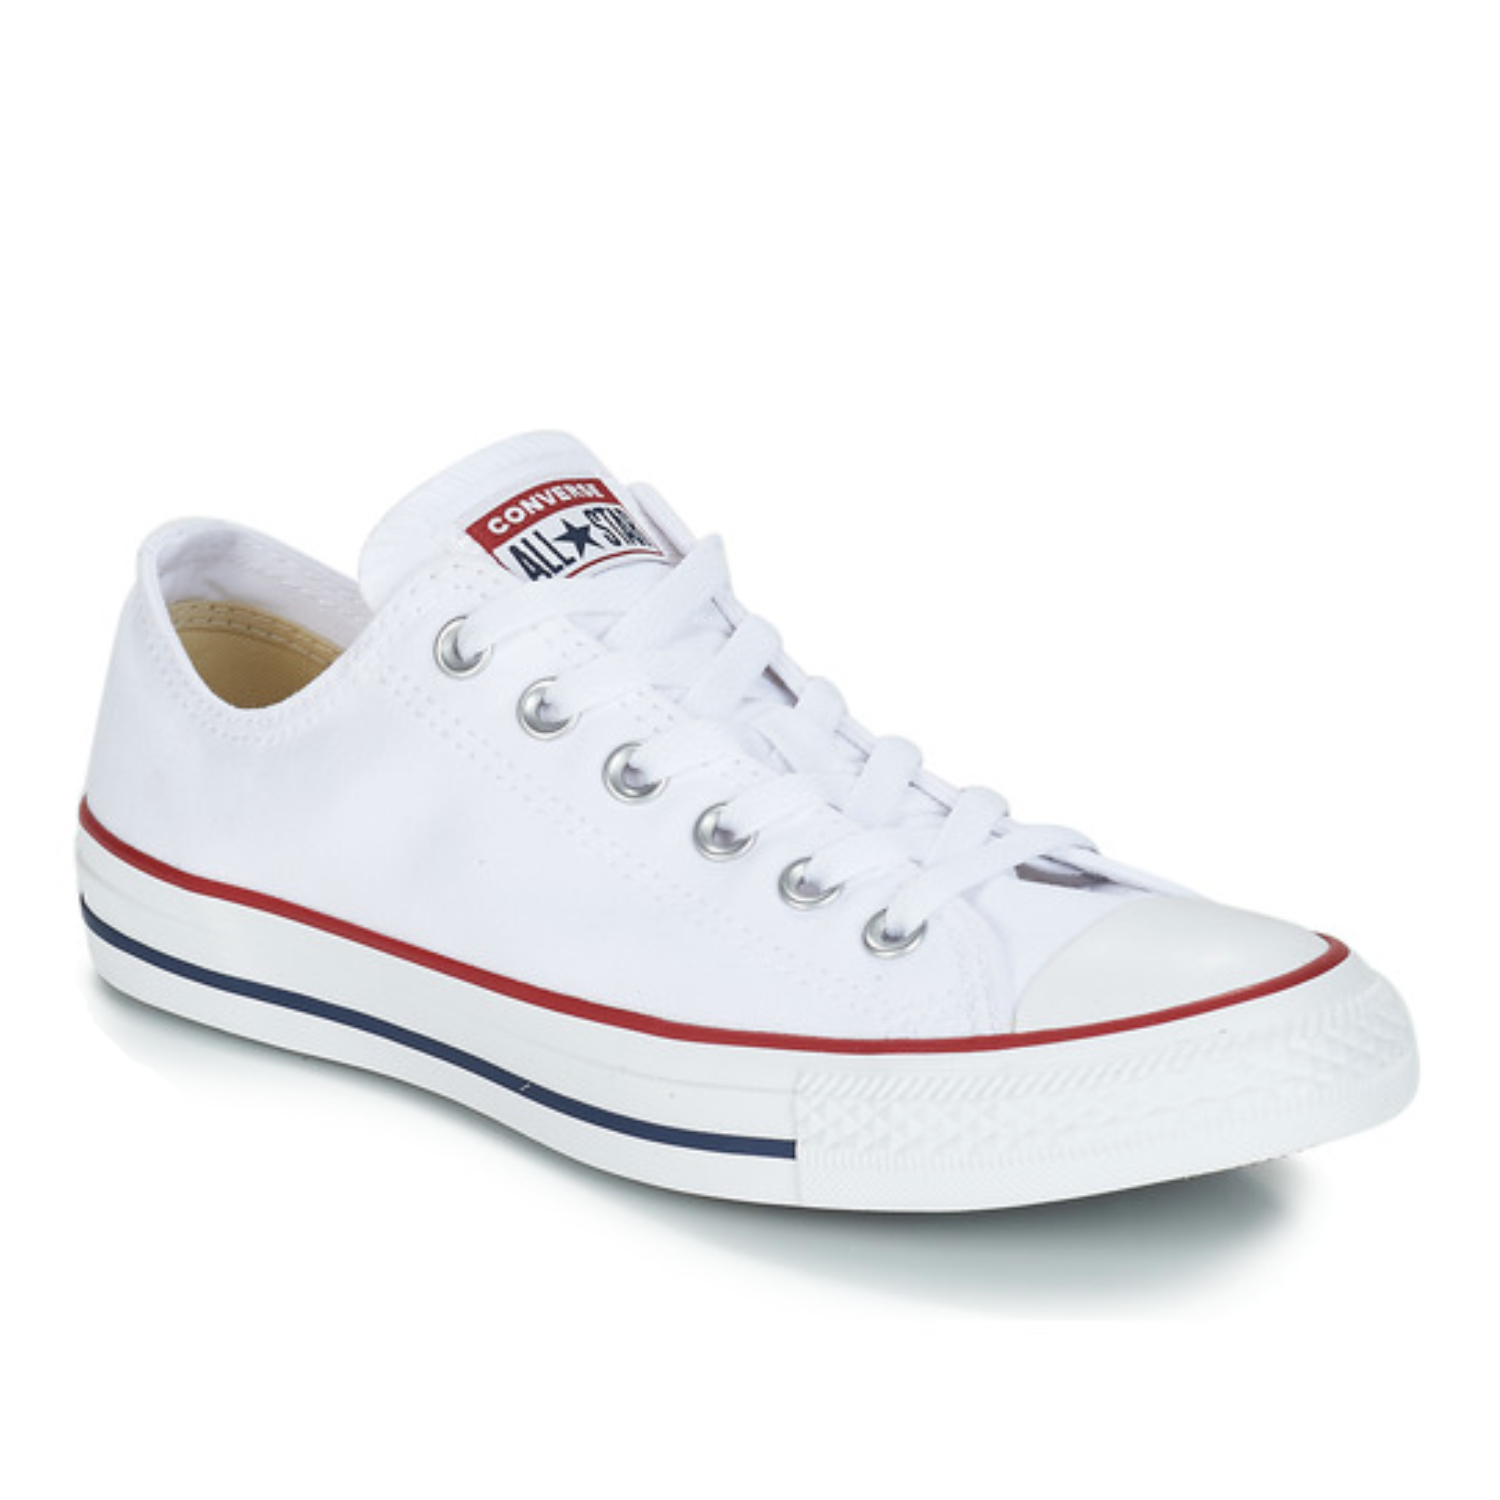 Converse all star blanche homme